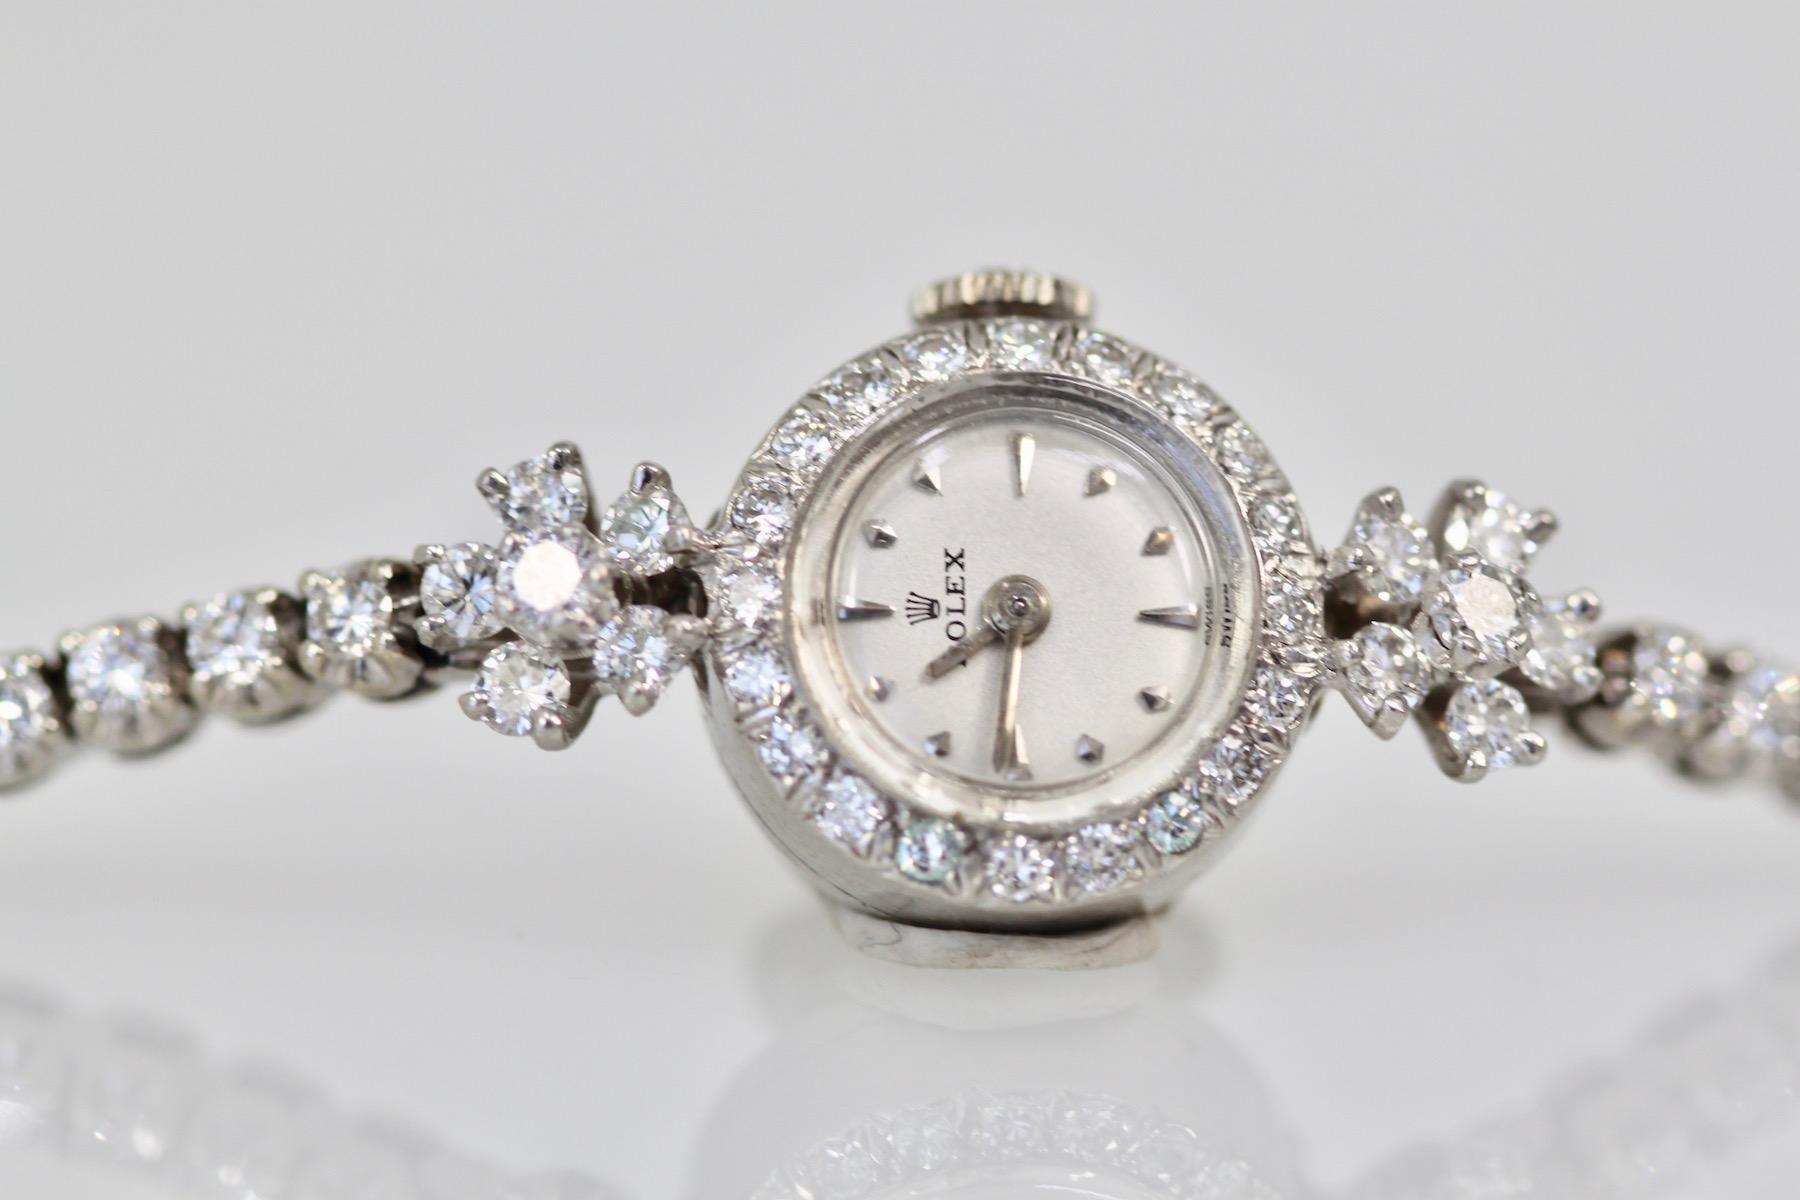 This Rolex Platinum Diamond Wristwatch is Circa 1960 and is gorgeous simple and timeless.  The watch has been serviced and a new crystal and the dial I had restored to perfection.  What I love about this watch is it looks like a diamond bracelet